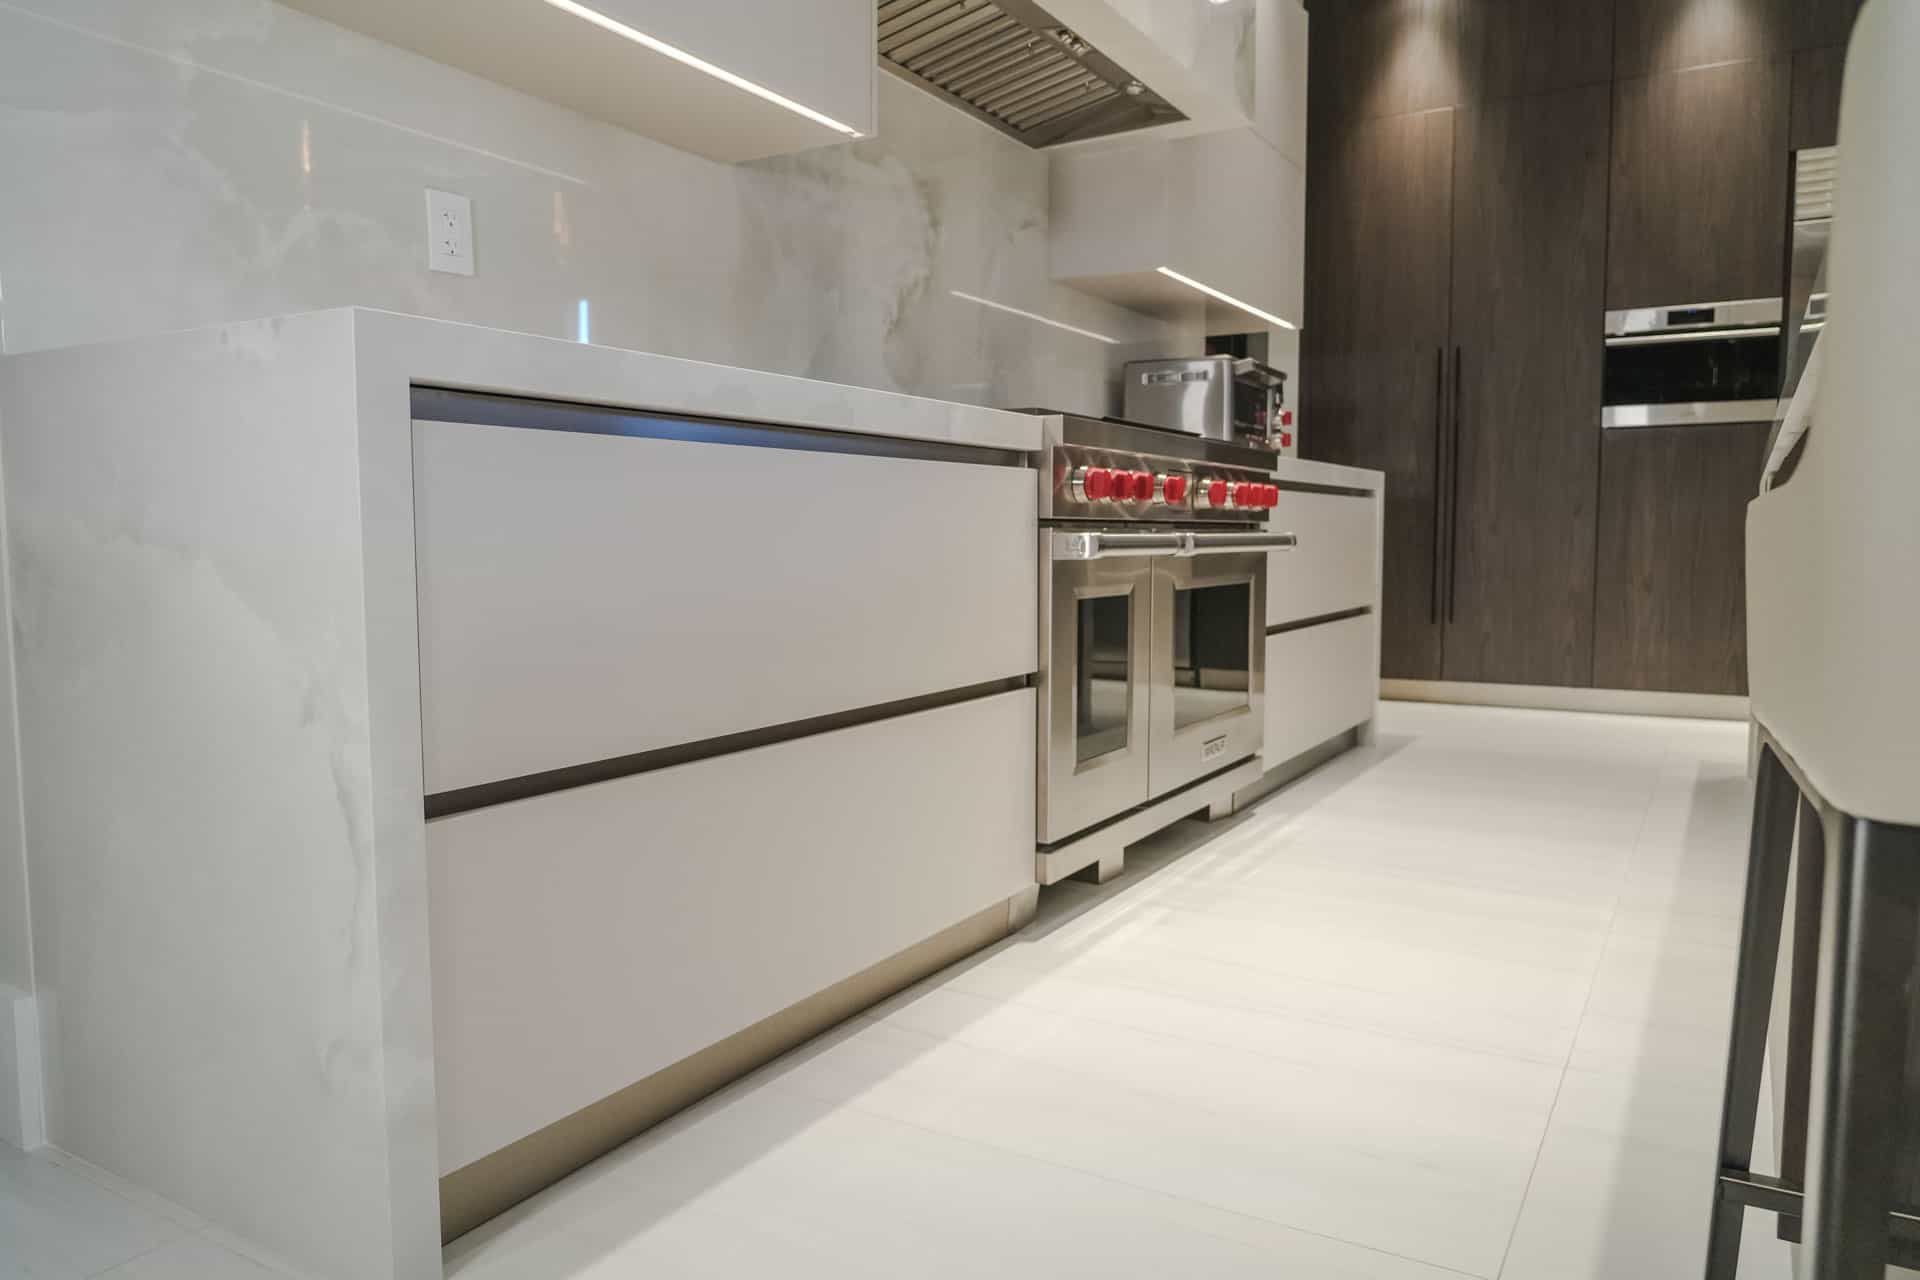 "Modernize and Enhance Your Kitchen!"